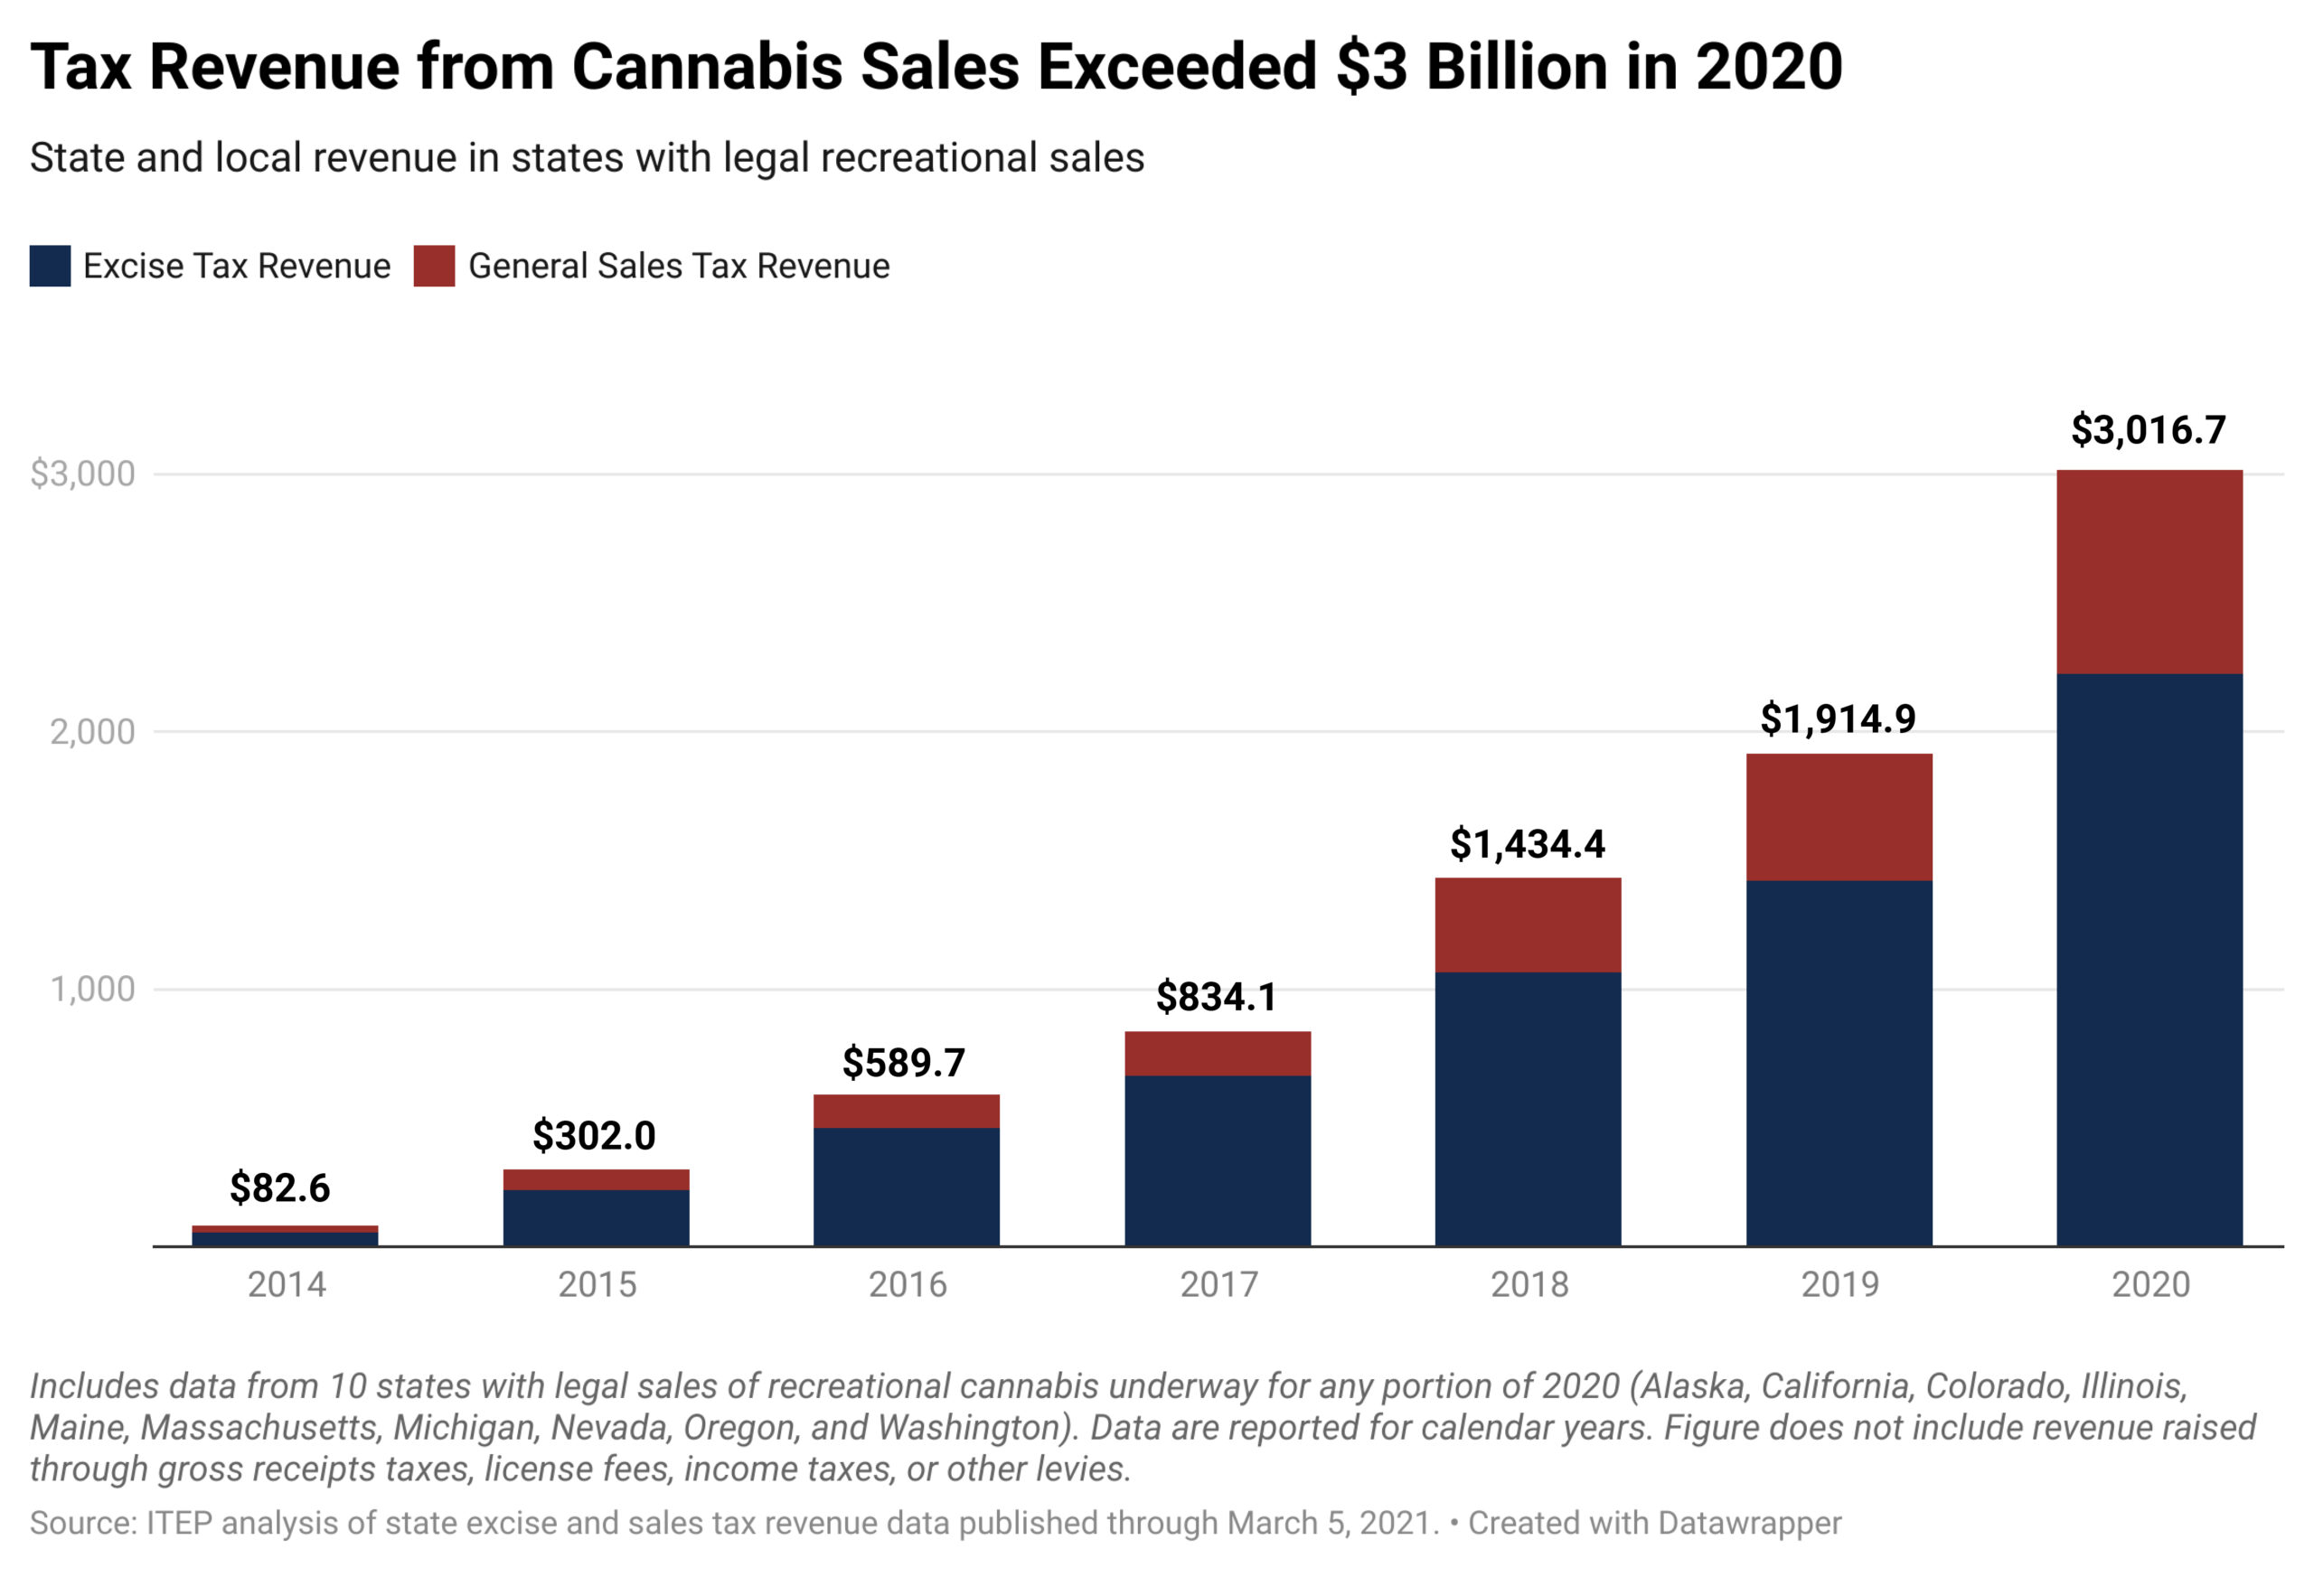 State and Local Cannabis Tax Revenue Jumps 58%, Surpassing $3 Billion in 2020